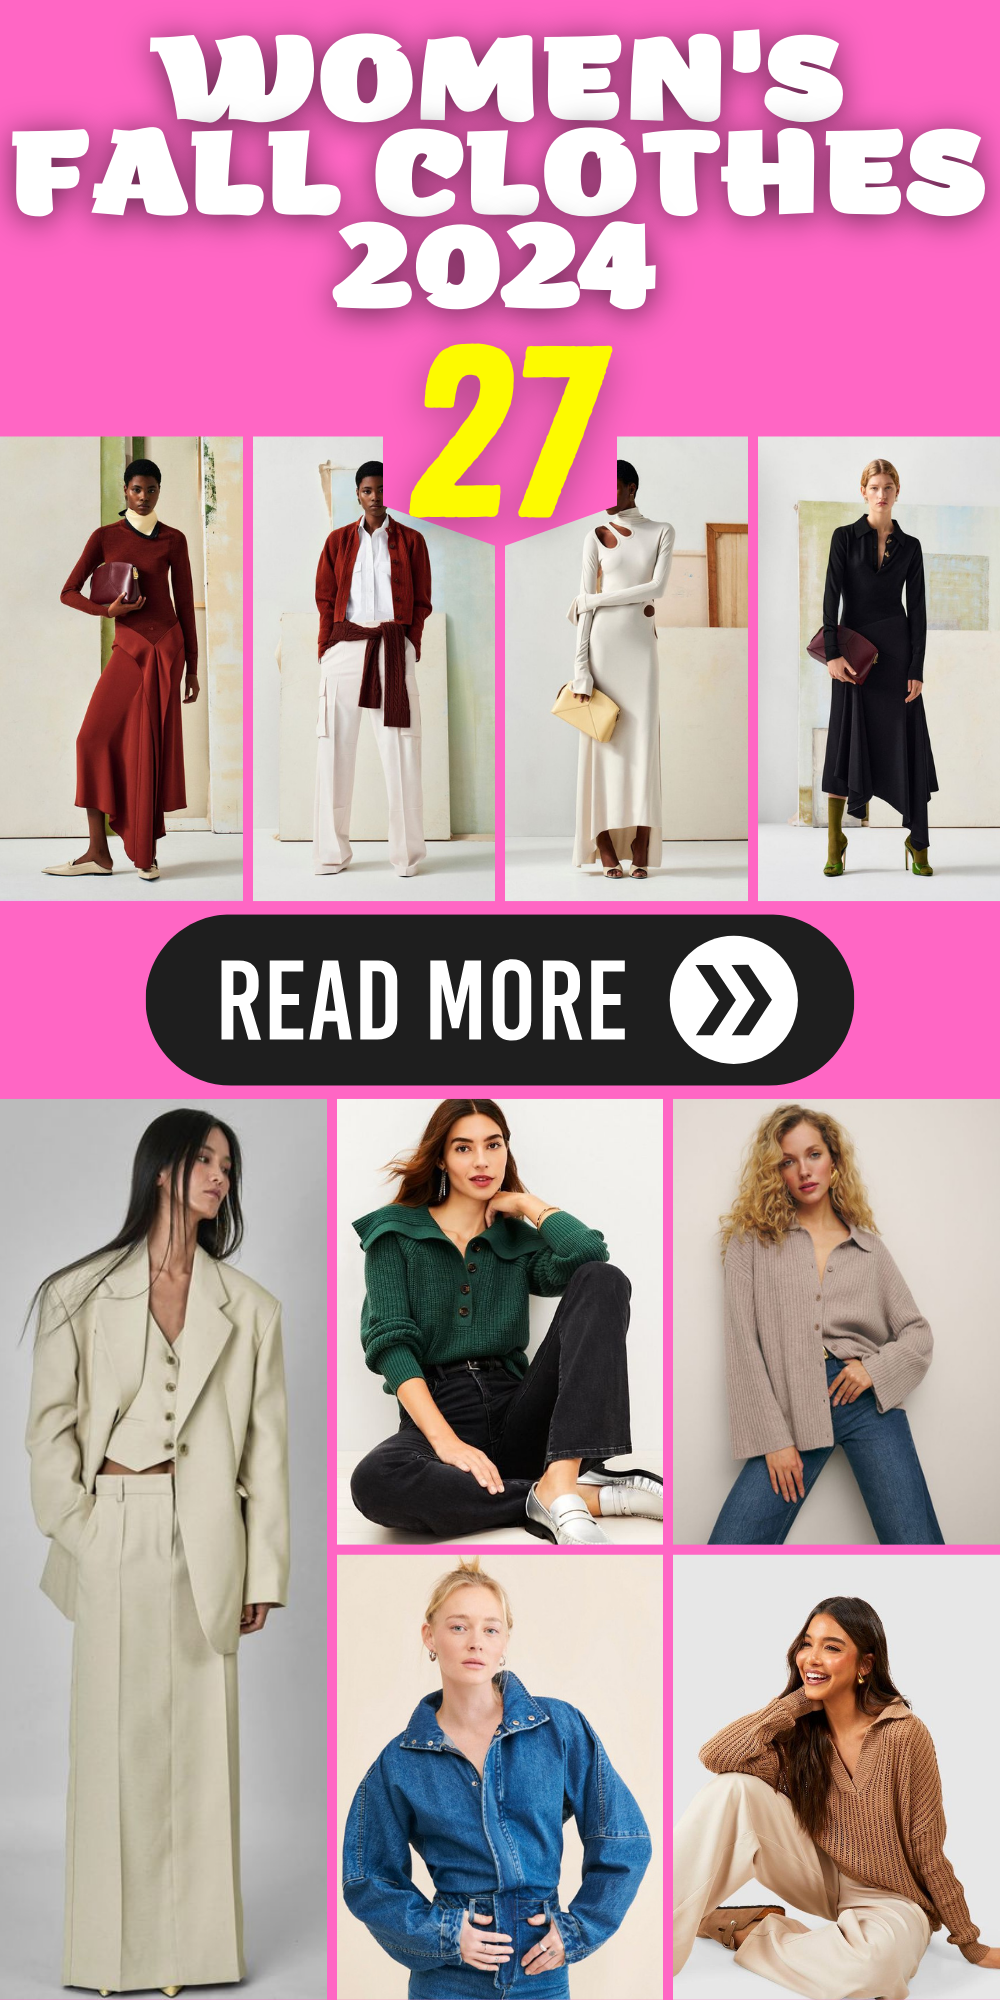 27 Trendy Women's Fall Clothes for 2024: Must-Have Fashion Ideas